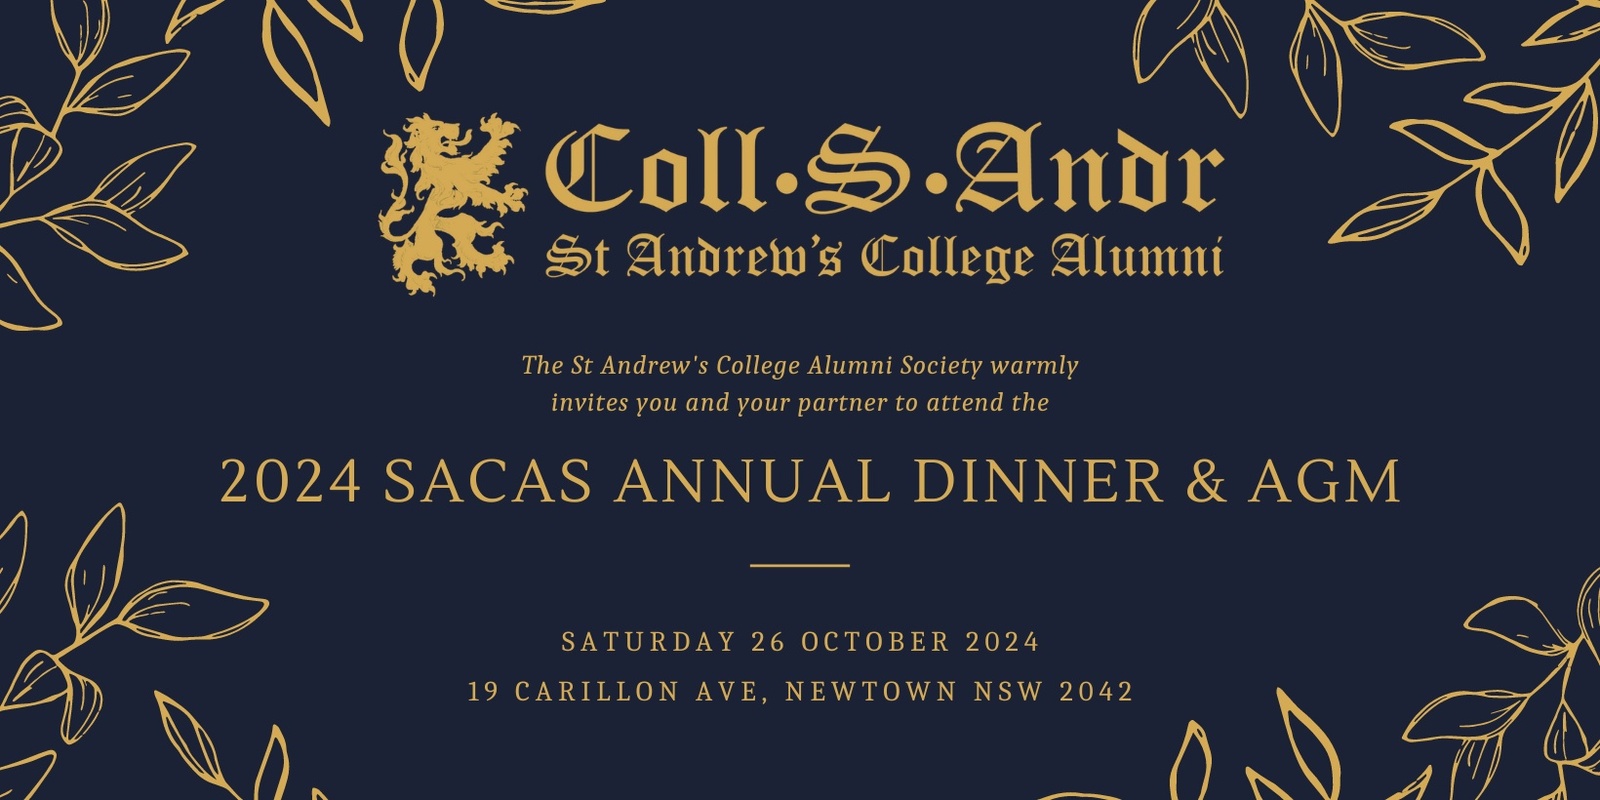 Banner image for 2024 SACAS Annual Dinner & AGM